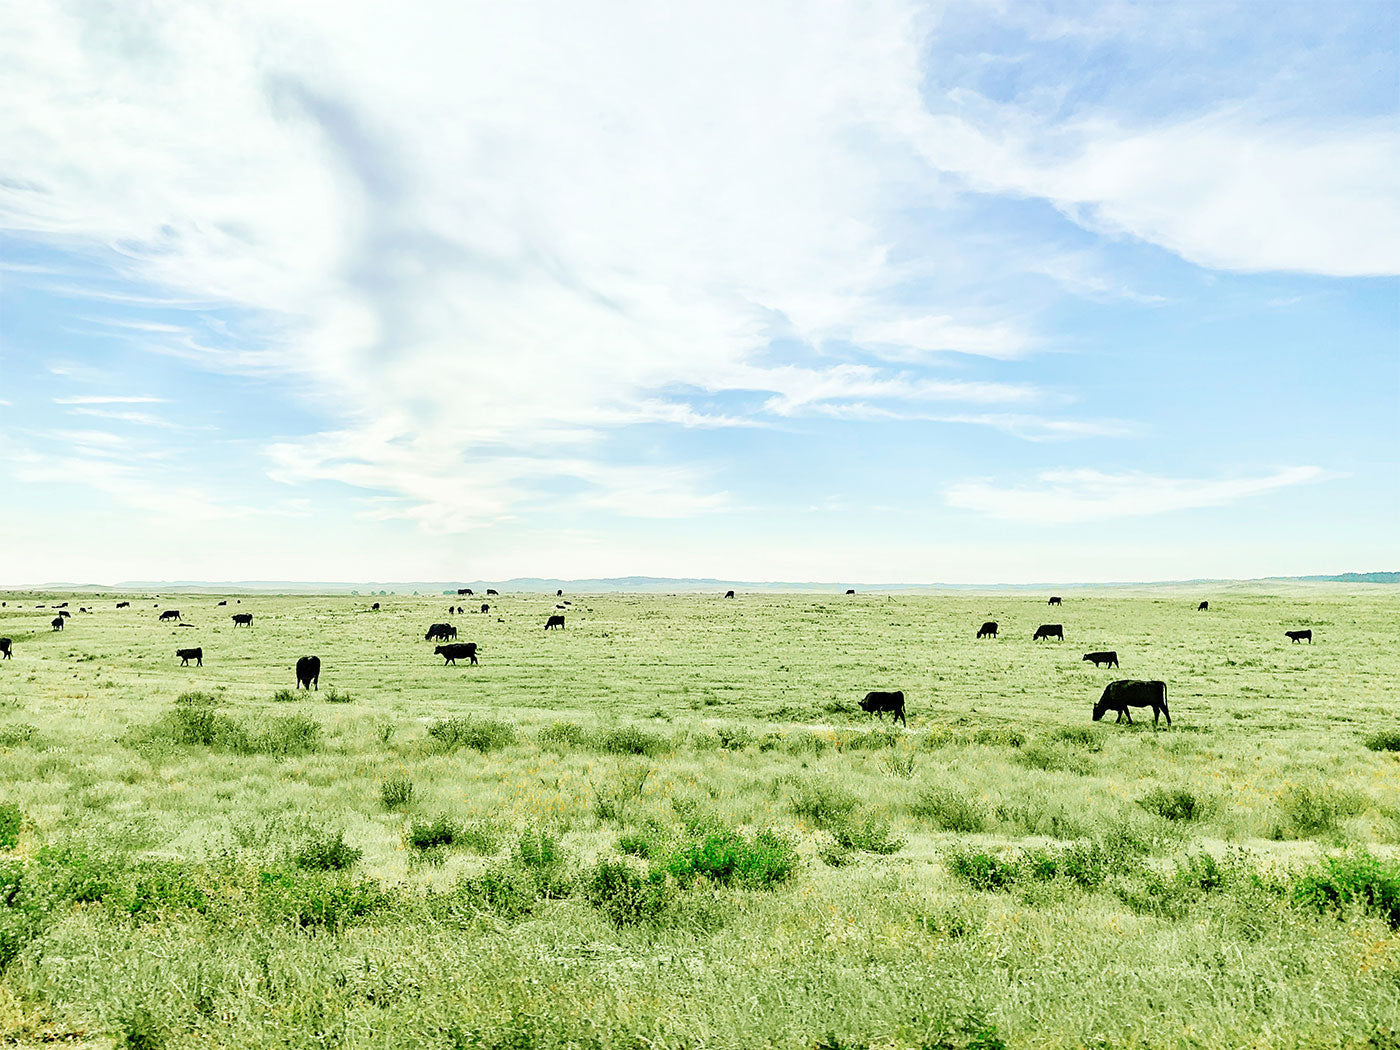 Cattle grazing on lush grass on the American Great Plains